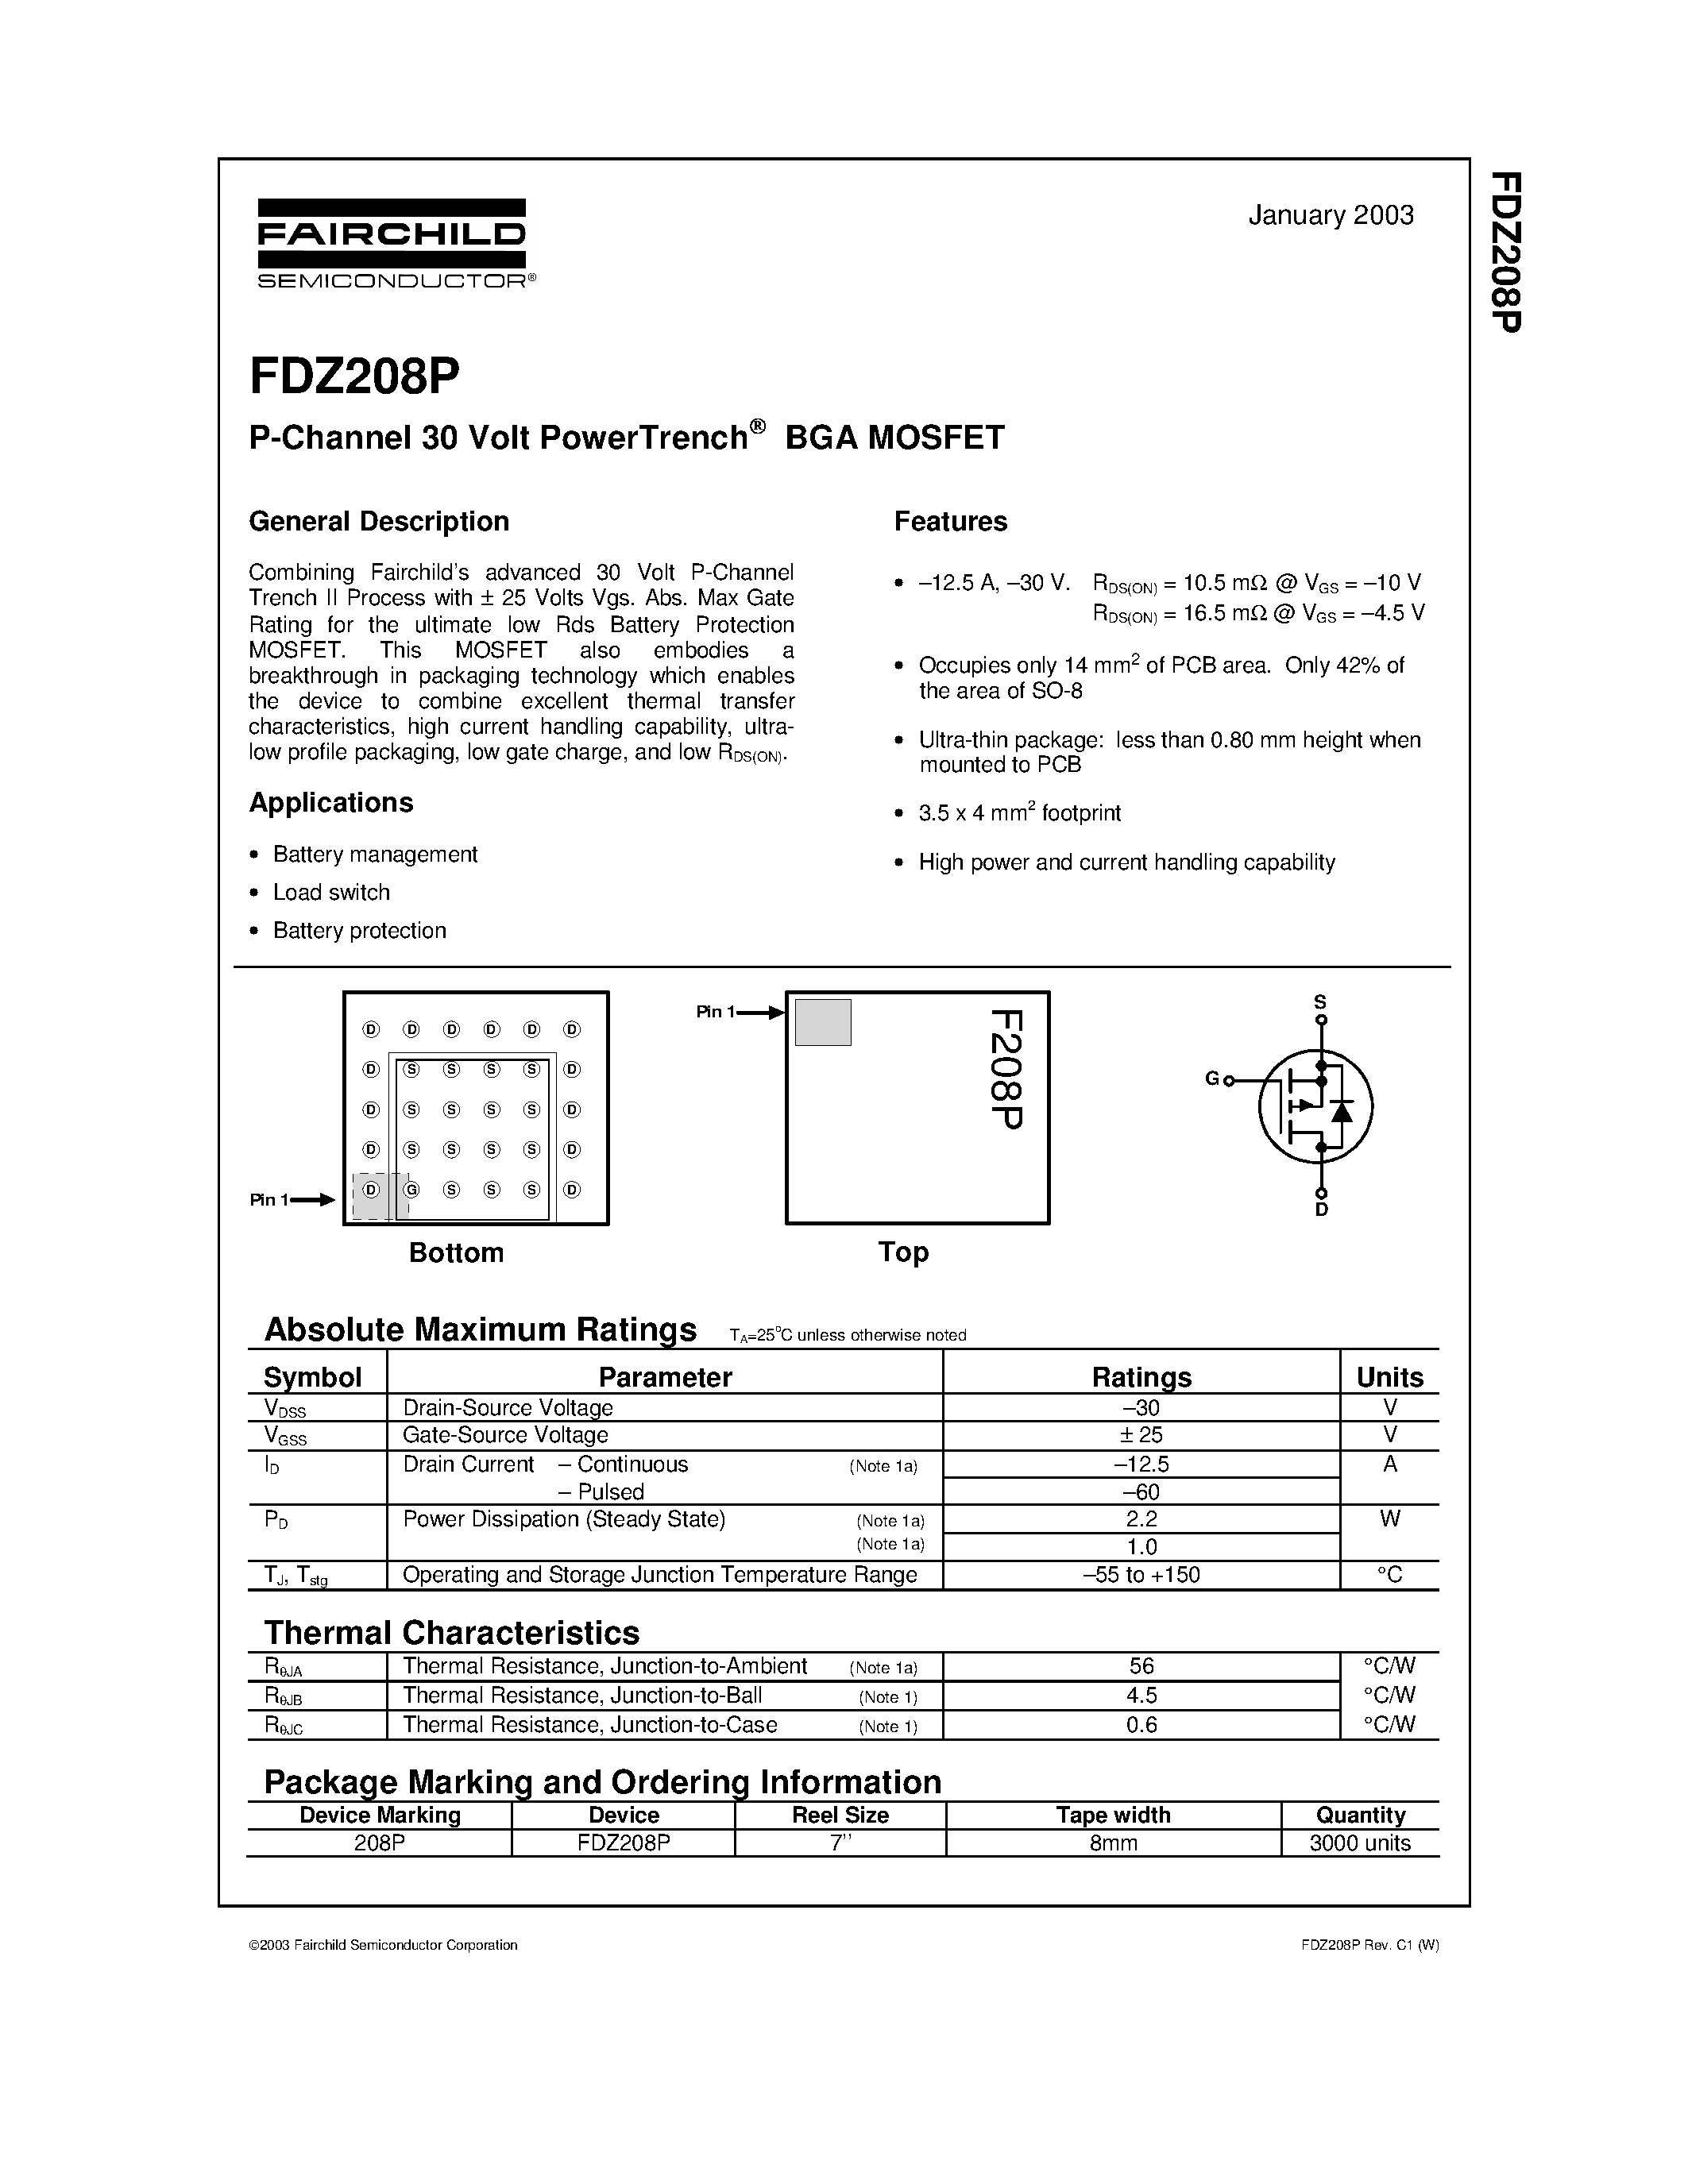 Datasheet FDZ208P - P-Channel 30 Volt PowerTrench page 1